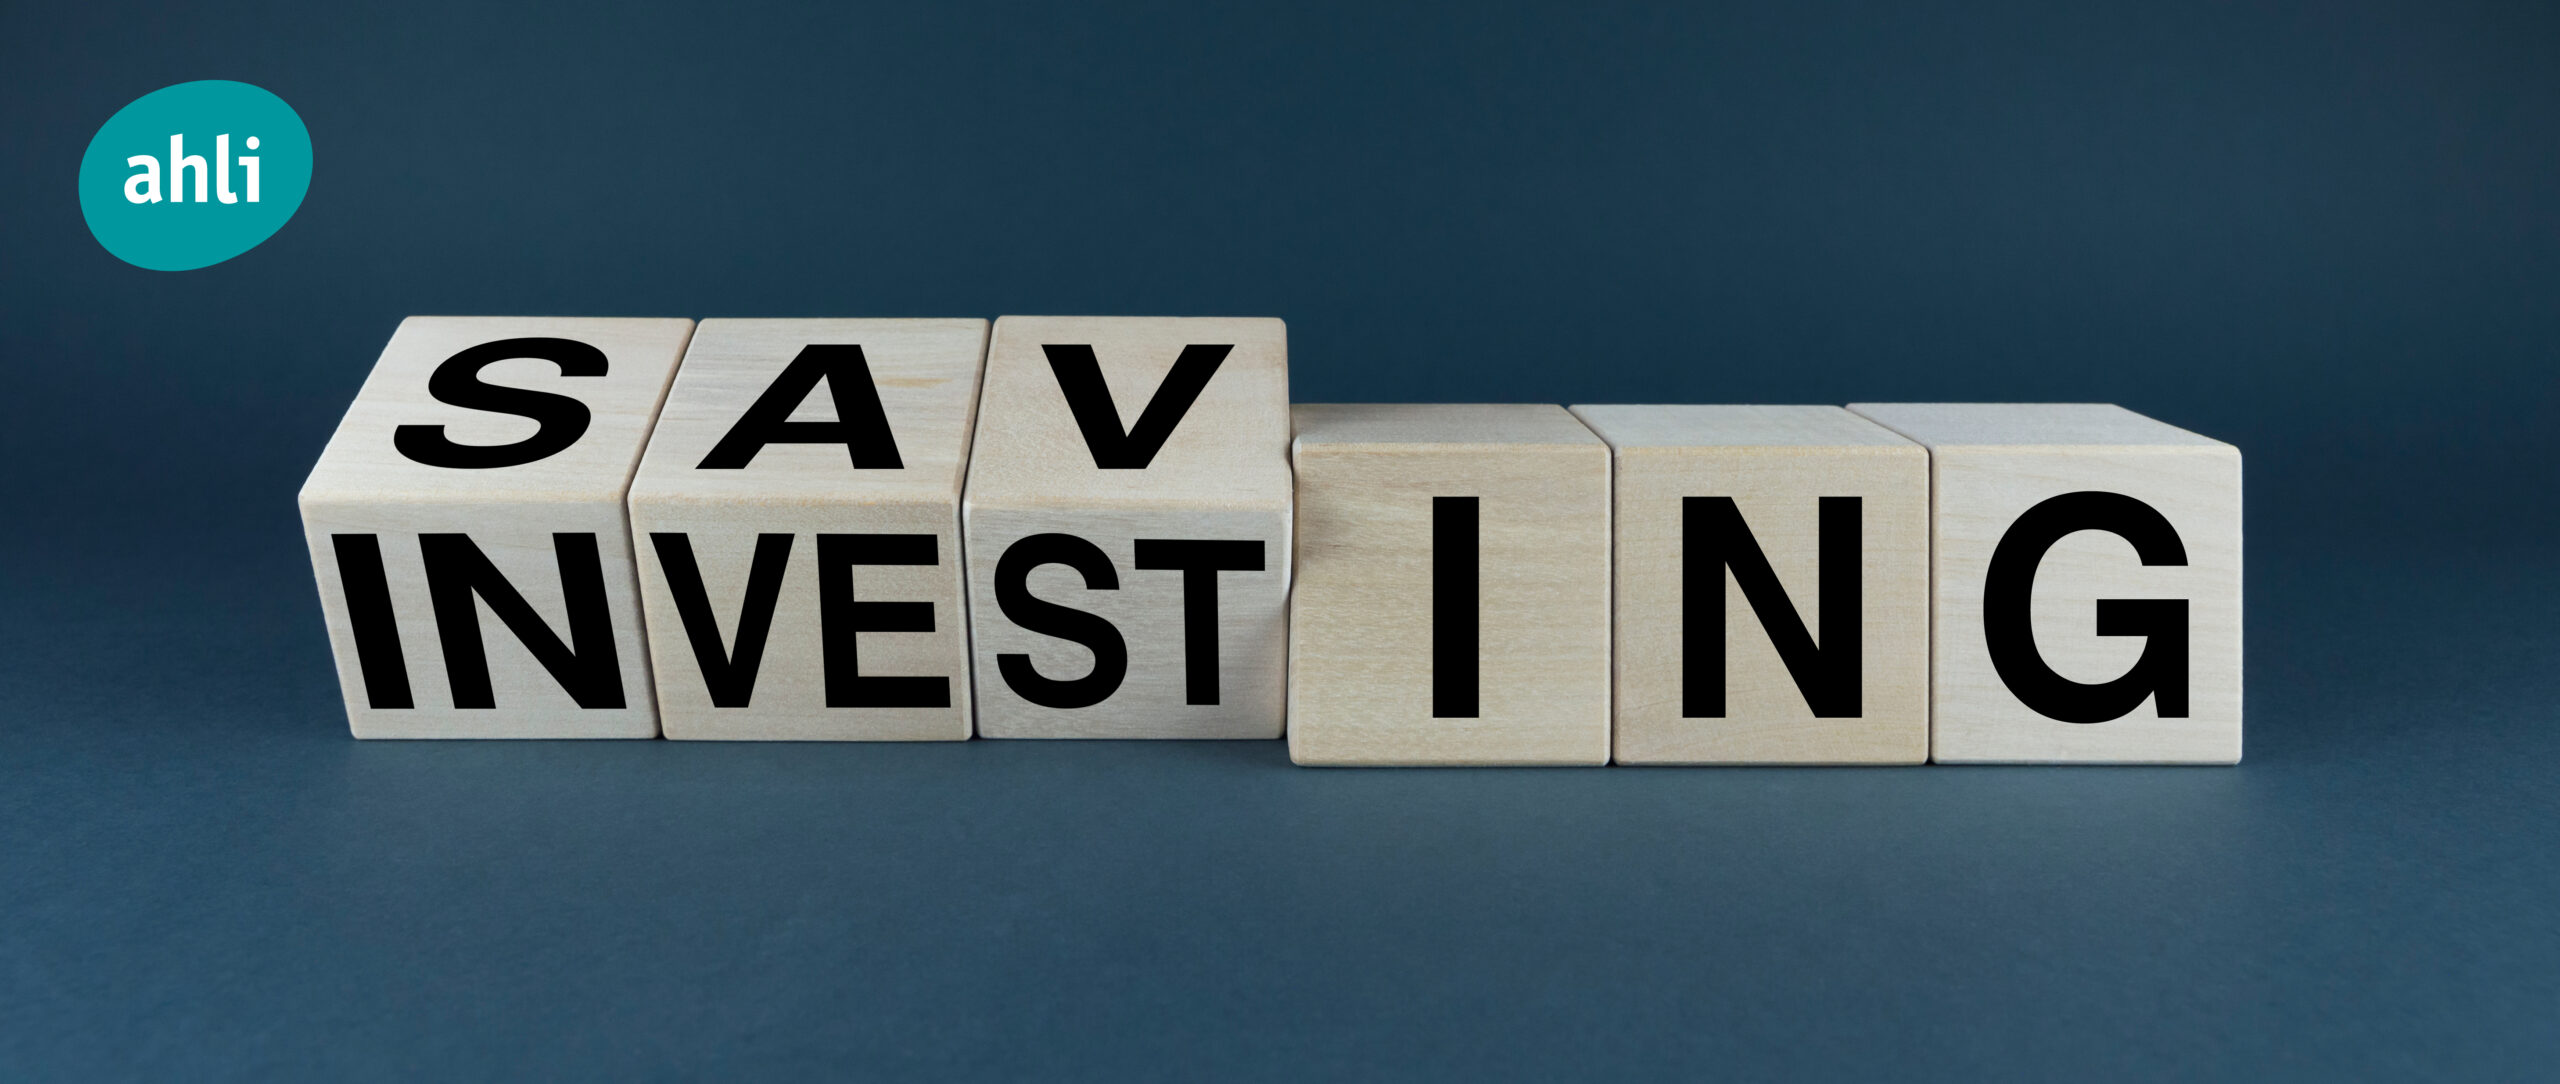 Investment, Savings, and Their Key Differences